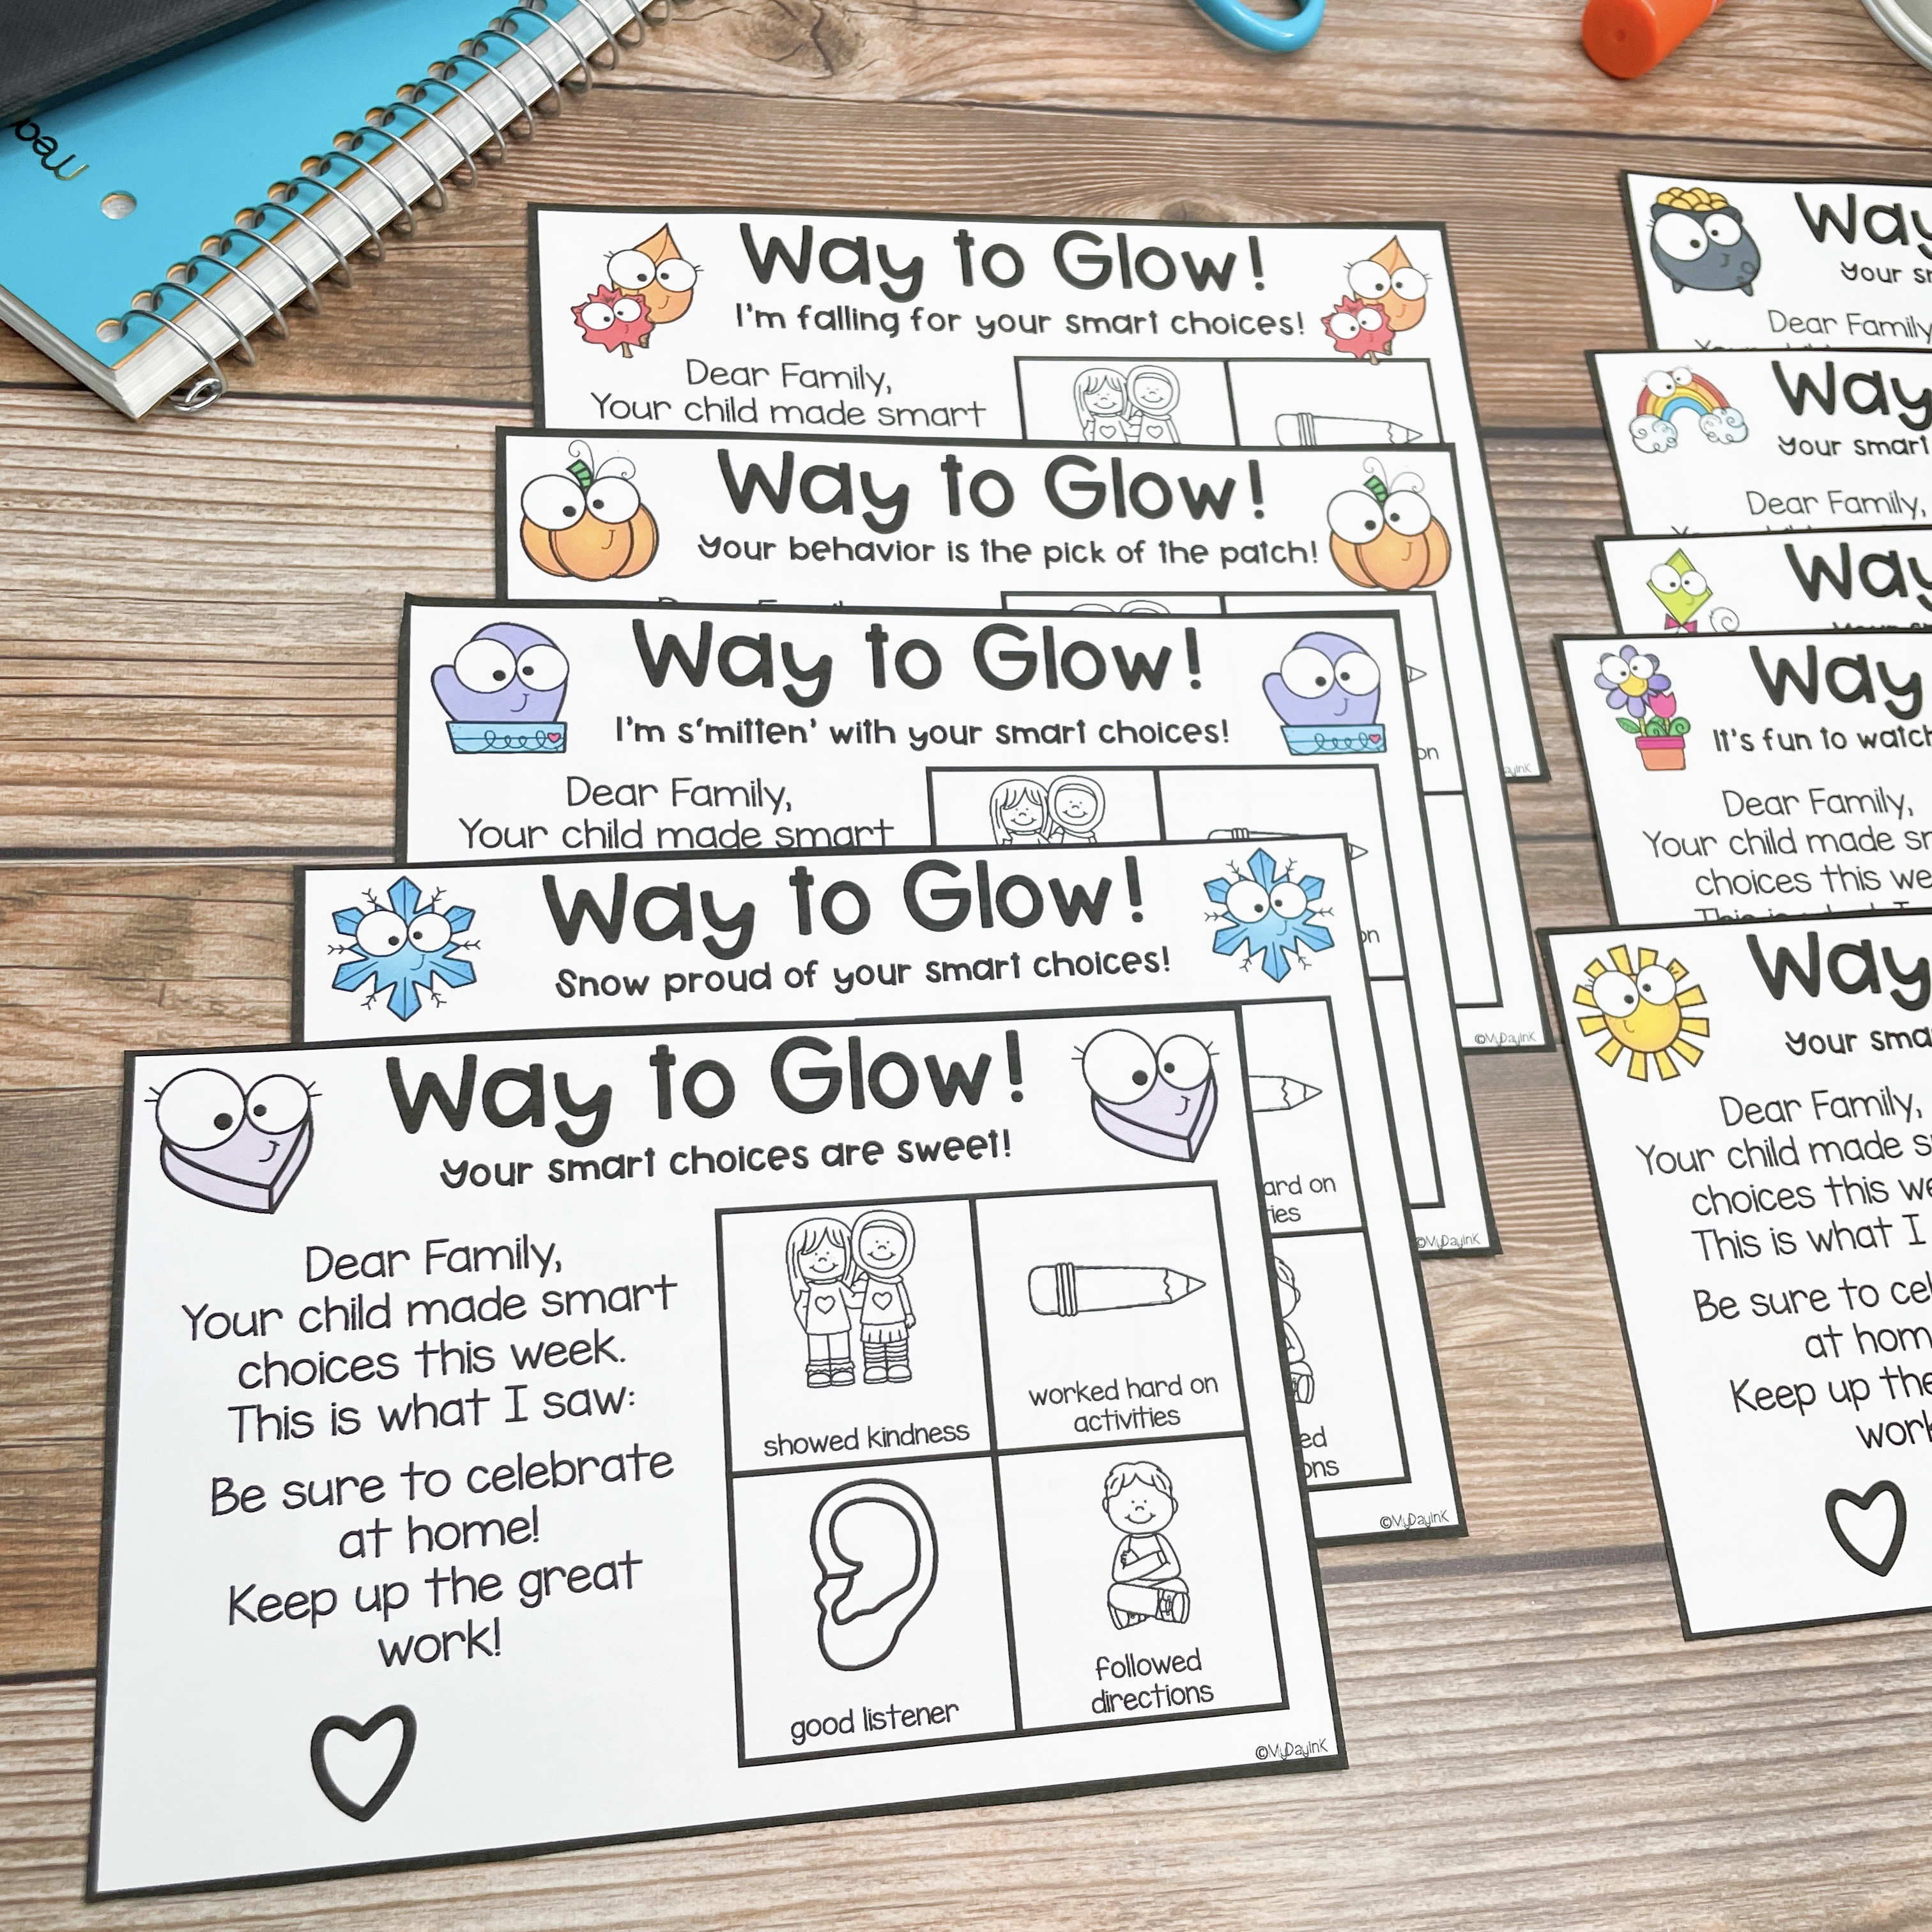 way to glow- Examples of Parent Letters From Teachers